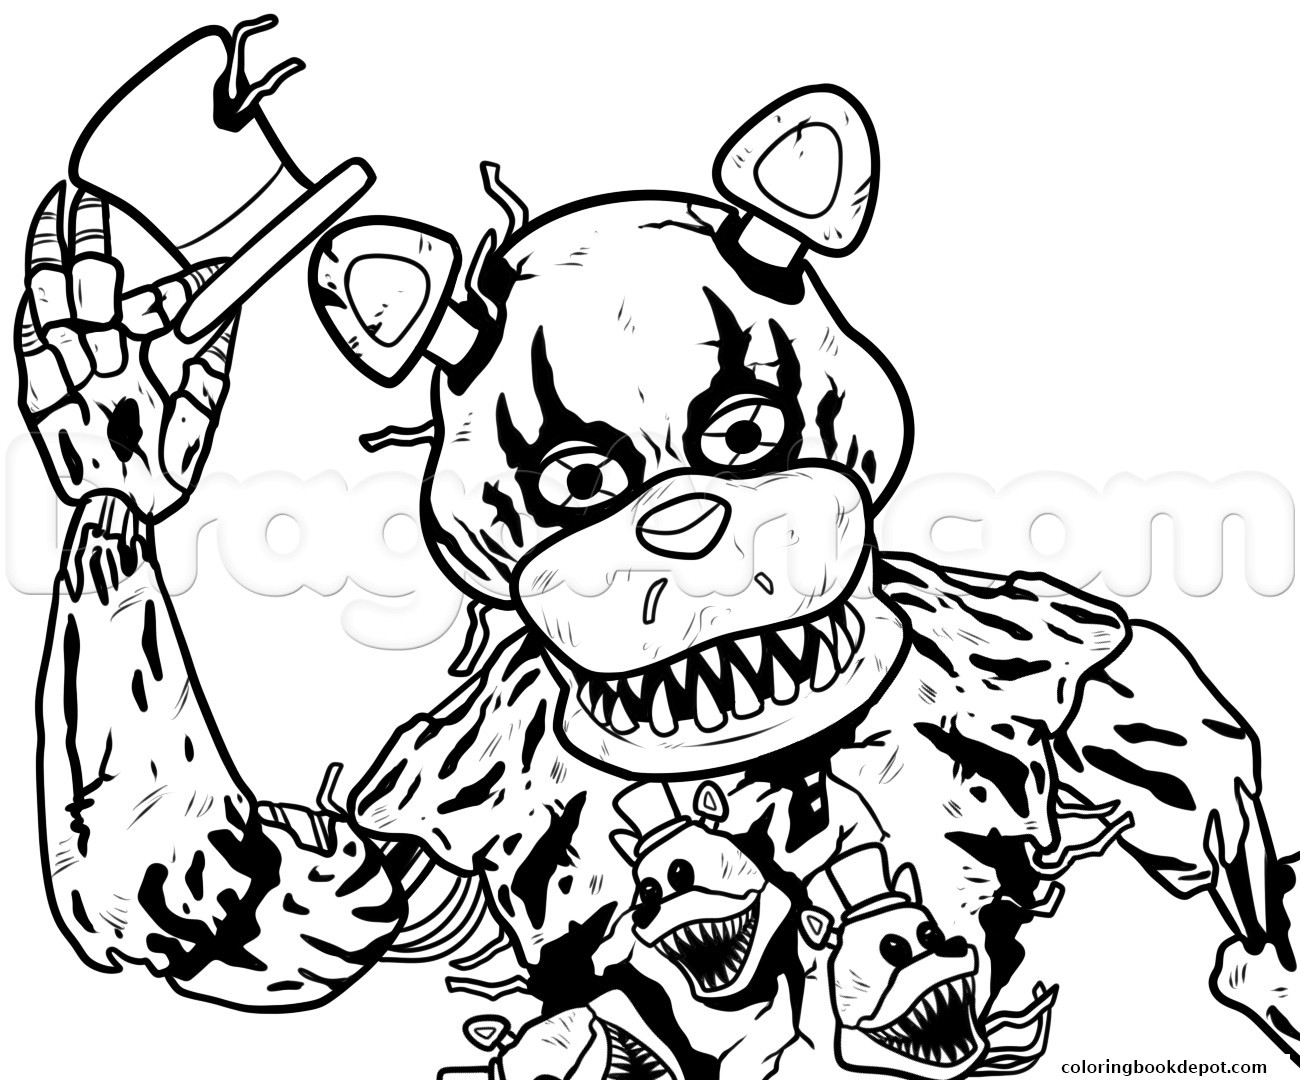 Fnaf Coloring Pages Printable
 Fnaf Mangle Coloring Page thekindproject